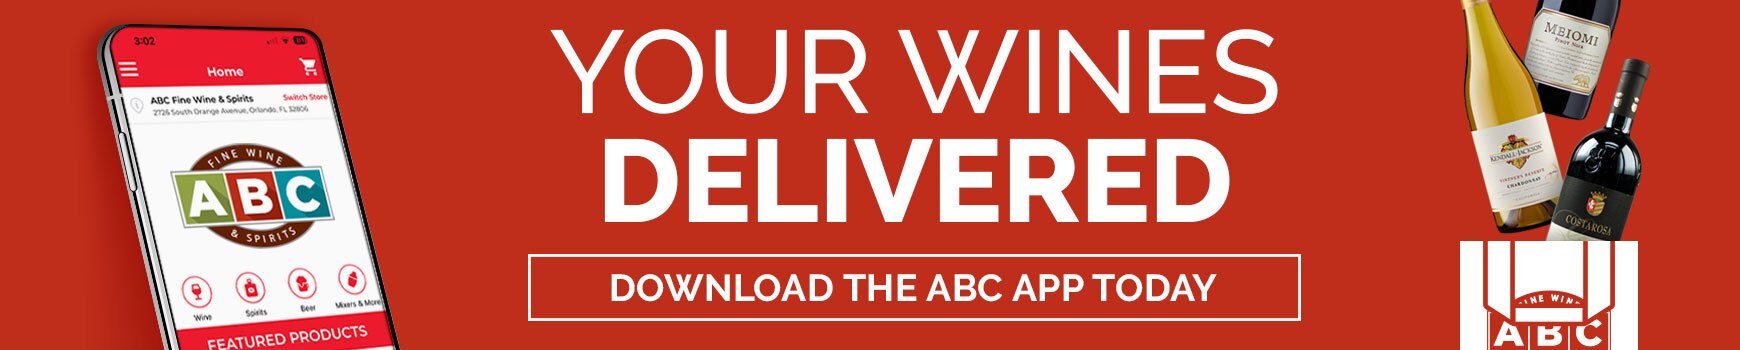 ABC App Wines Delivered